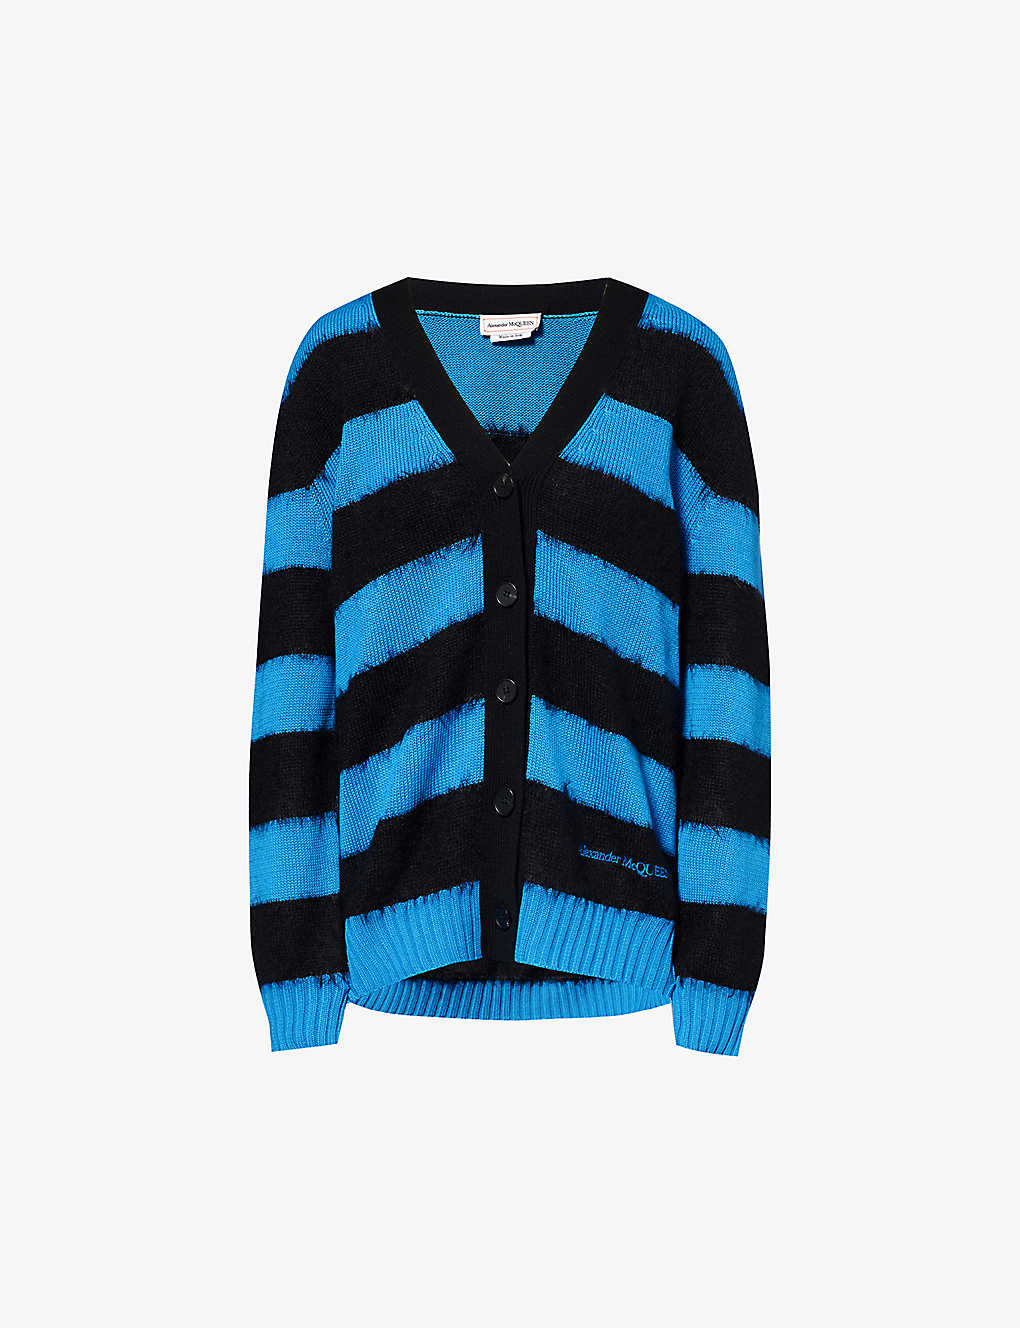 Shop Alexander Mcqueen Women's Lapis Blue Black Striped Brand-embroidered Cotton-knitted Cardigan